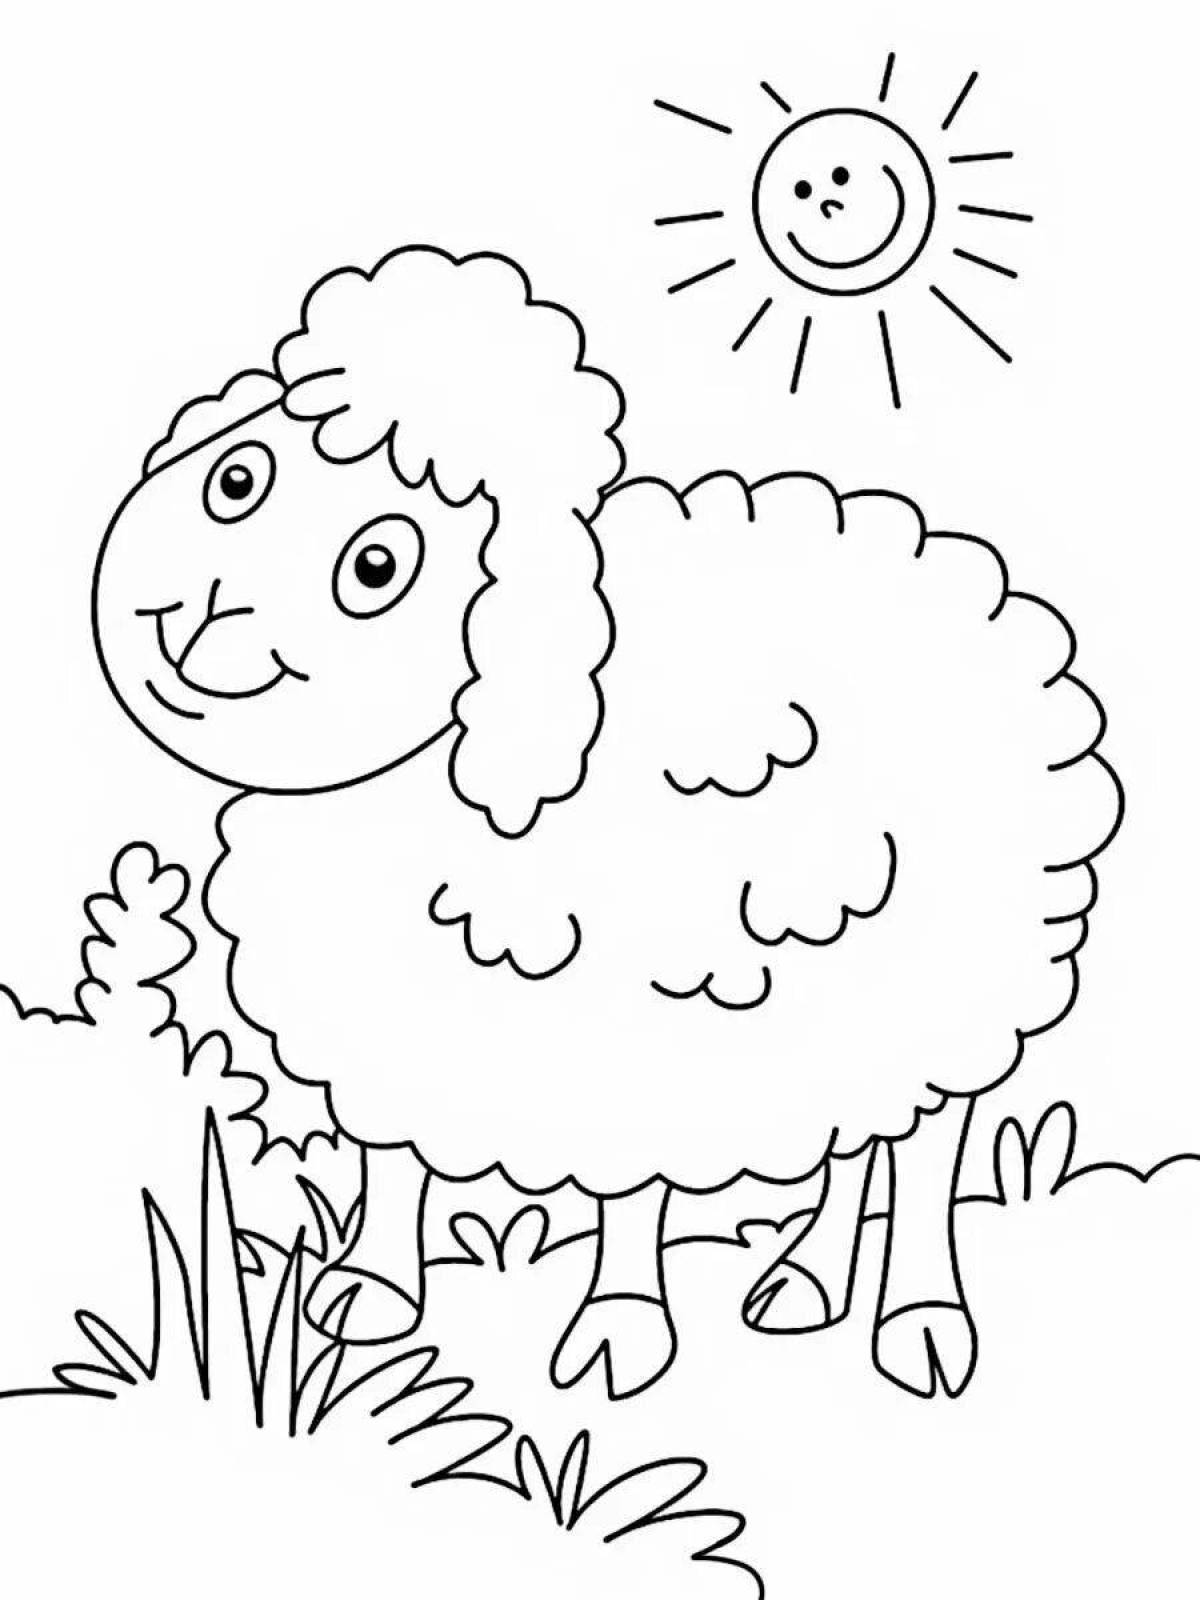 Blessed sheep coloring pages for kids